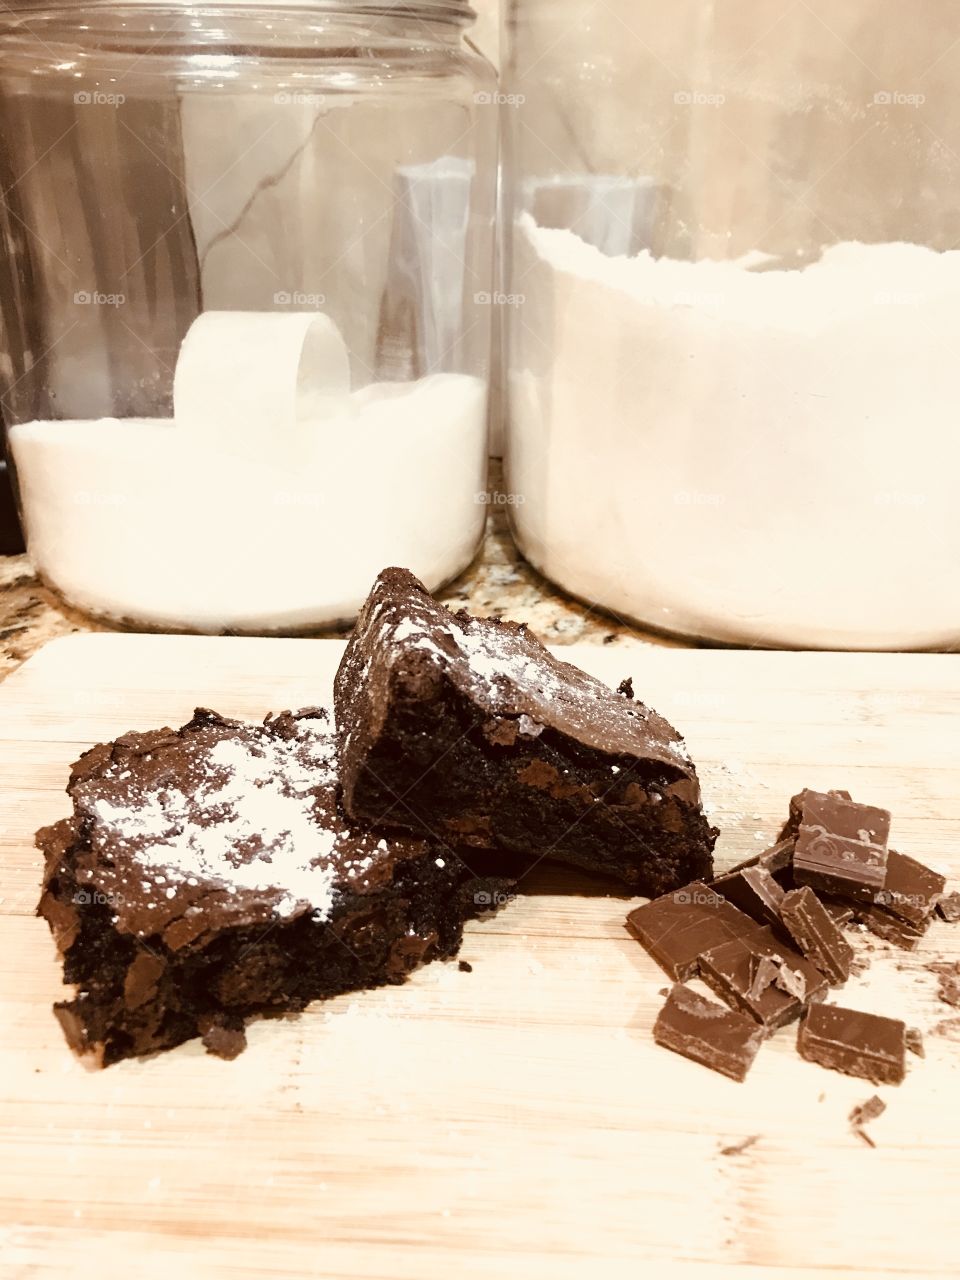 Chocolate brownies I made a while ago